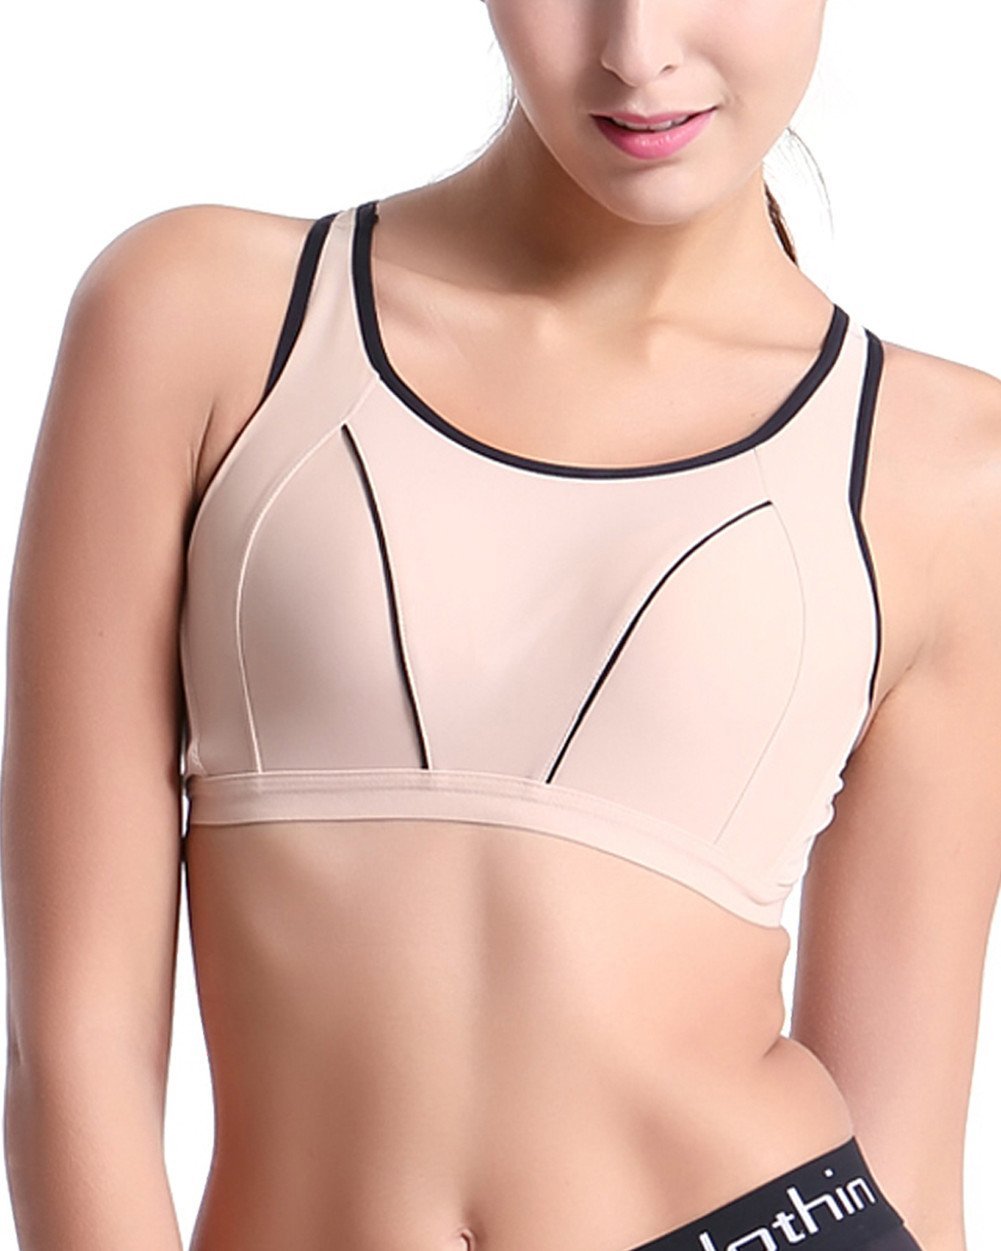 Clothin Girl's Seamless Racerback Wirefree Soft Cup Fintness Sports Bra